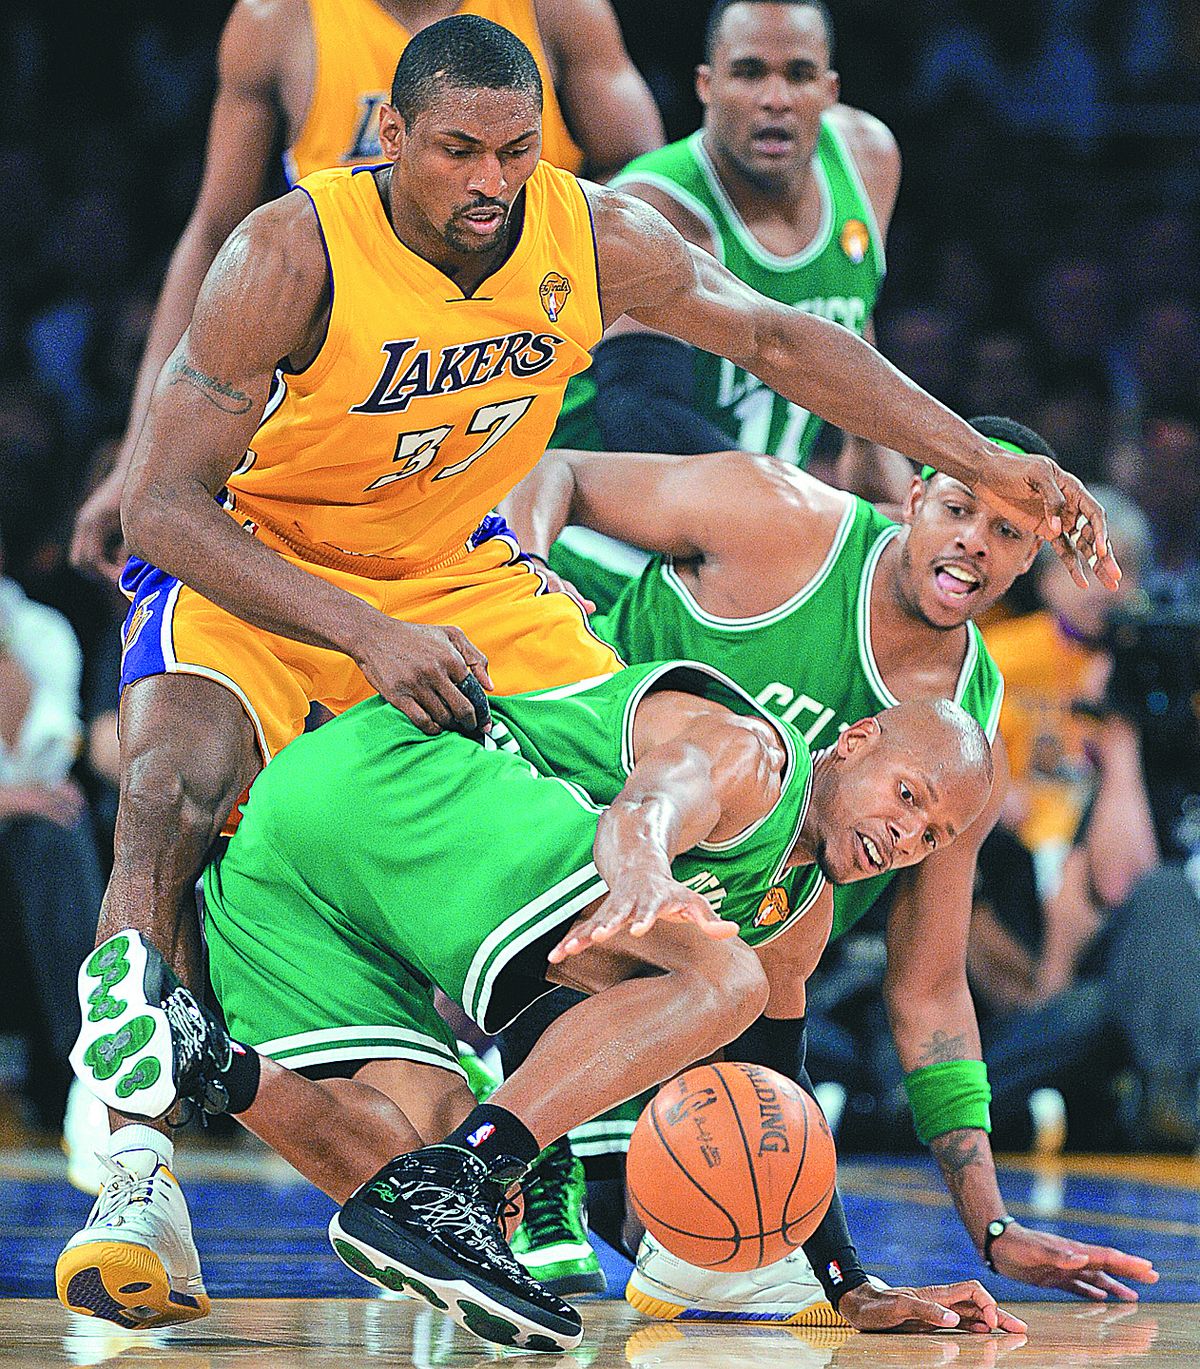 Celtics Ray Allen, front, and Paul Pierce scramble for the ball with Lakers’ Ron Artest during the first half. (Associated Press)